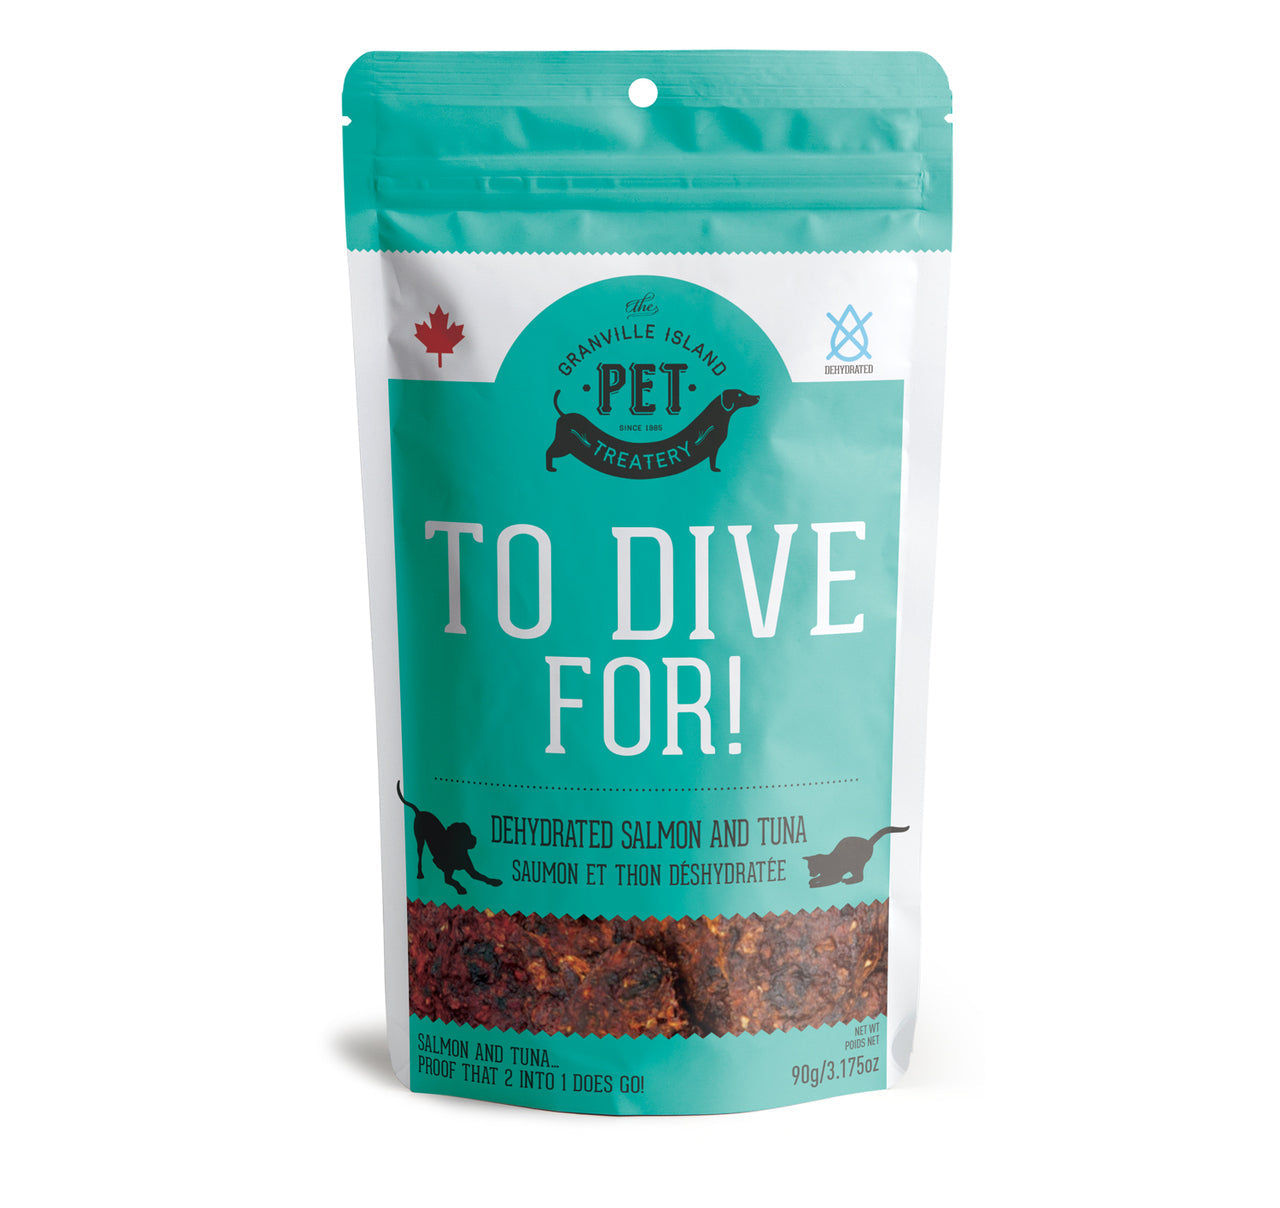 Granville Island Pet Treatery To Dive For! Salmon & Tuna Dehydrated Dog and Cat Treats - 3.17 oz Bag  